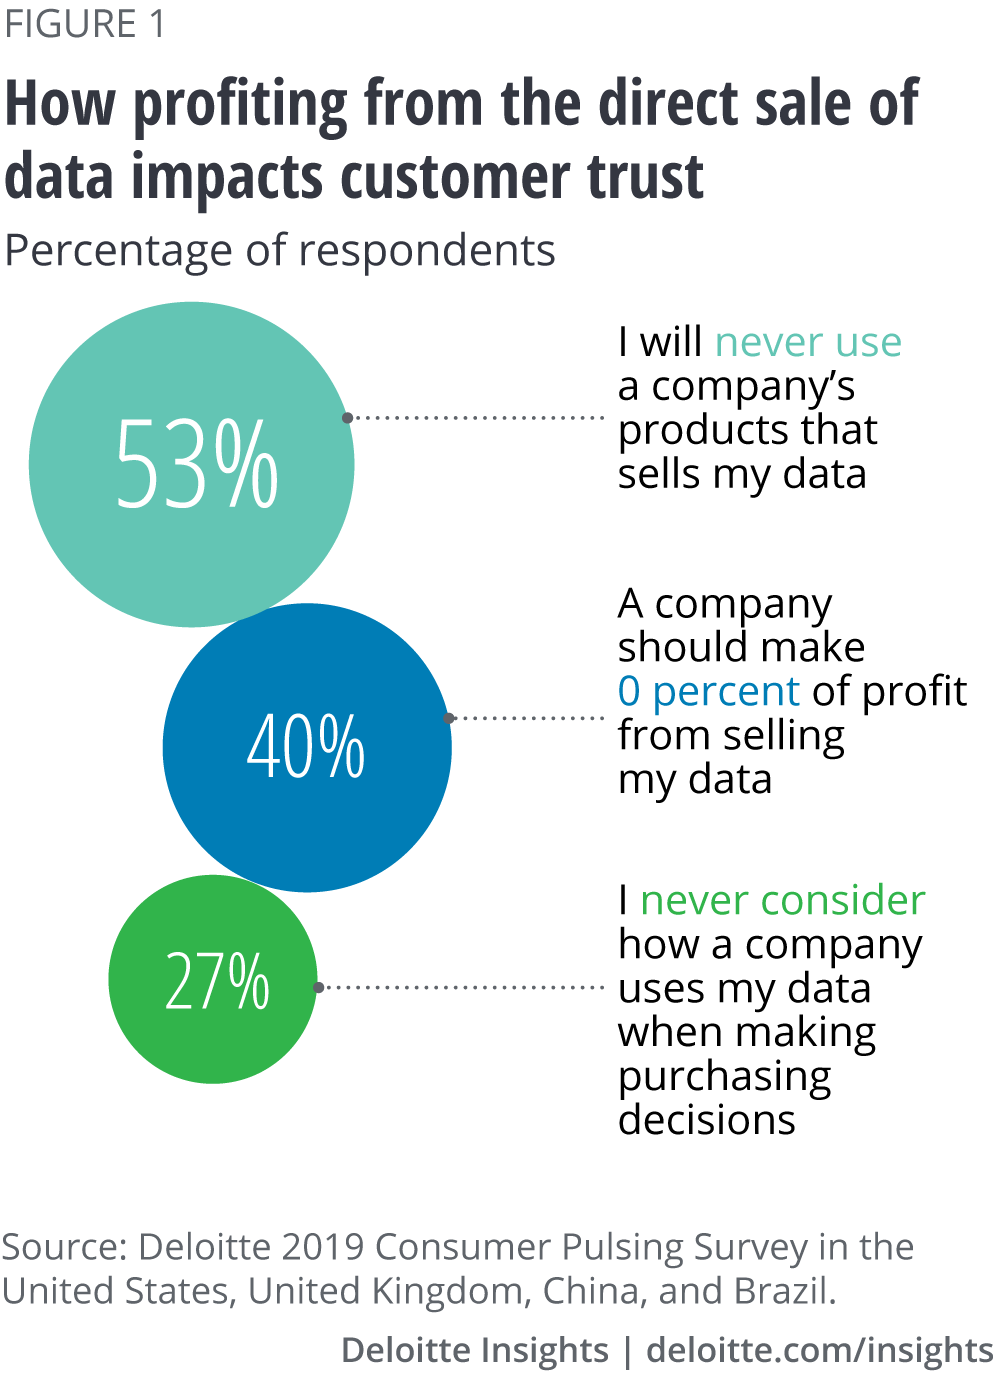 How profiting from the direct sale of data impacts customer trust